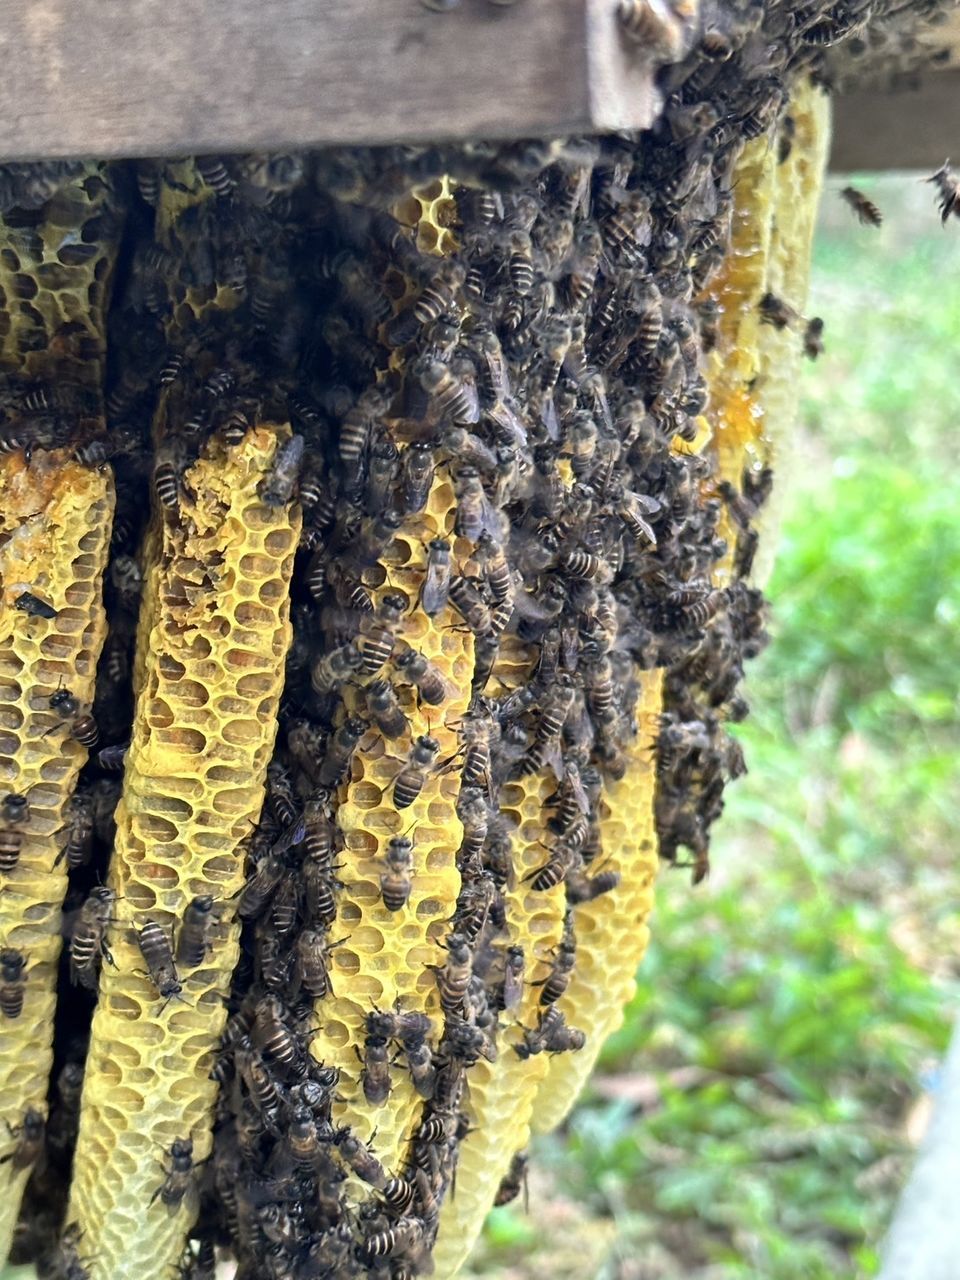 bee, insect, beehive, close-up, animal, day, nature, honeycomb, apiculture, no people, focus on foreground, wildlife, animal themes, pattern, plant, animal wildlife, outdoors, beauty in nature, large group of animals, tree trunk, trunk, group of animals, apiary, tree, soil, growth, yellow, honey bee